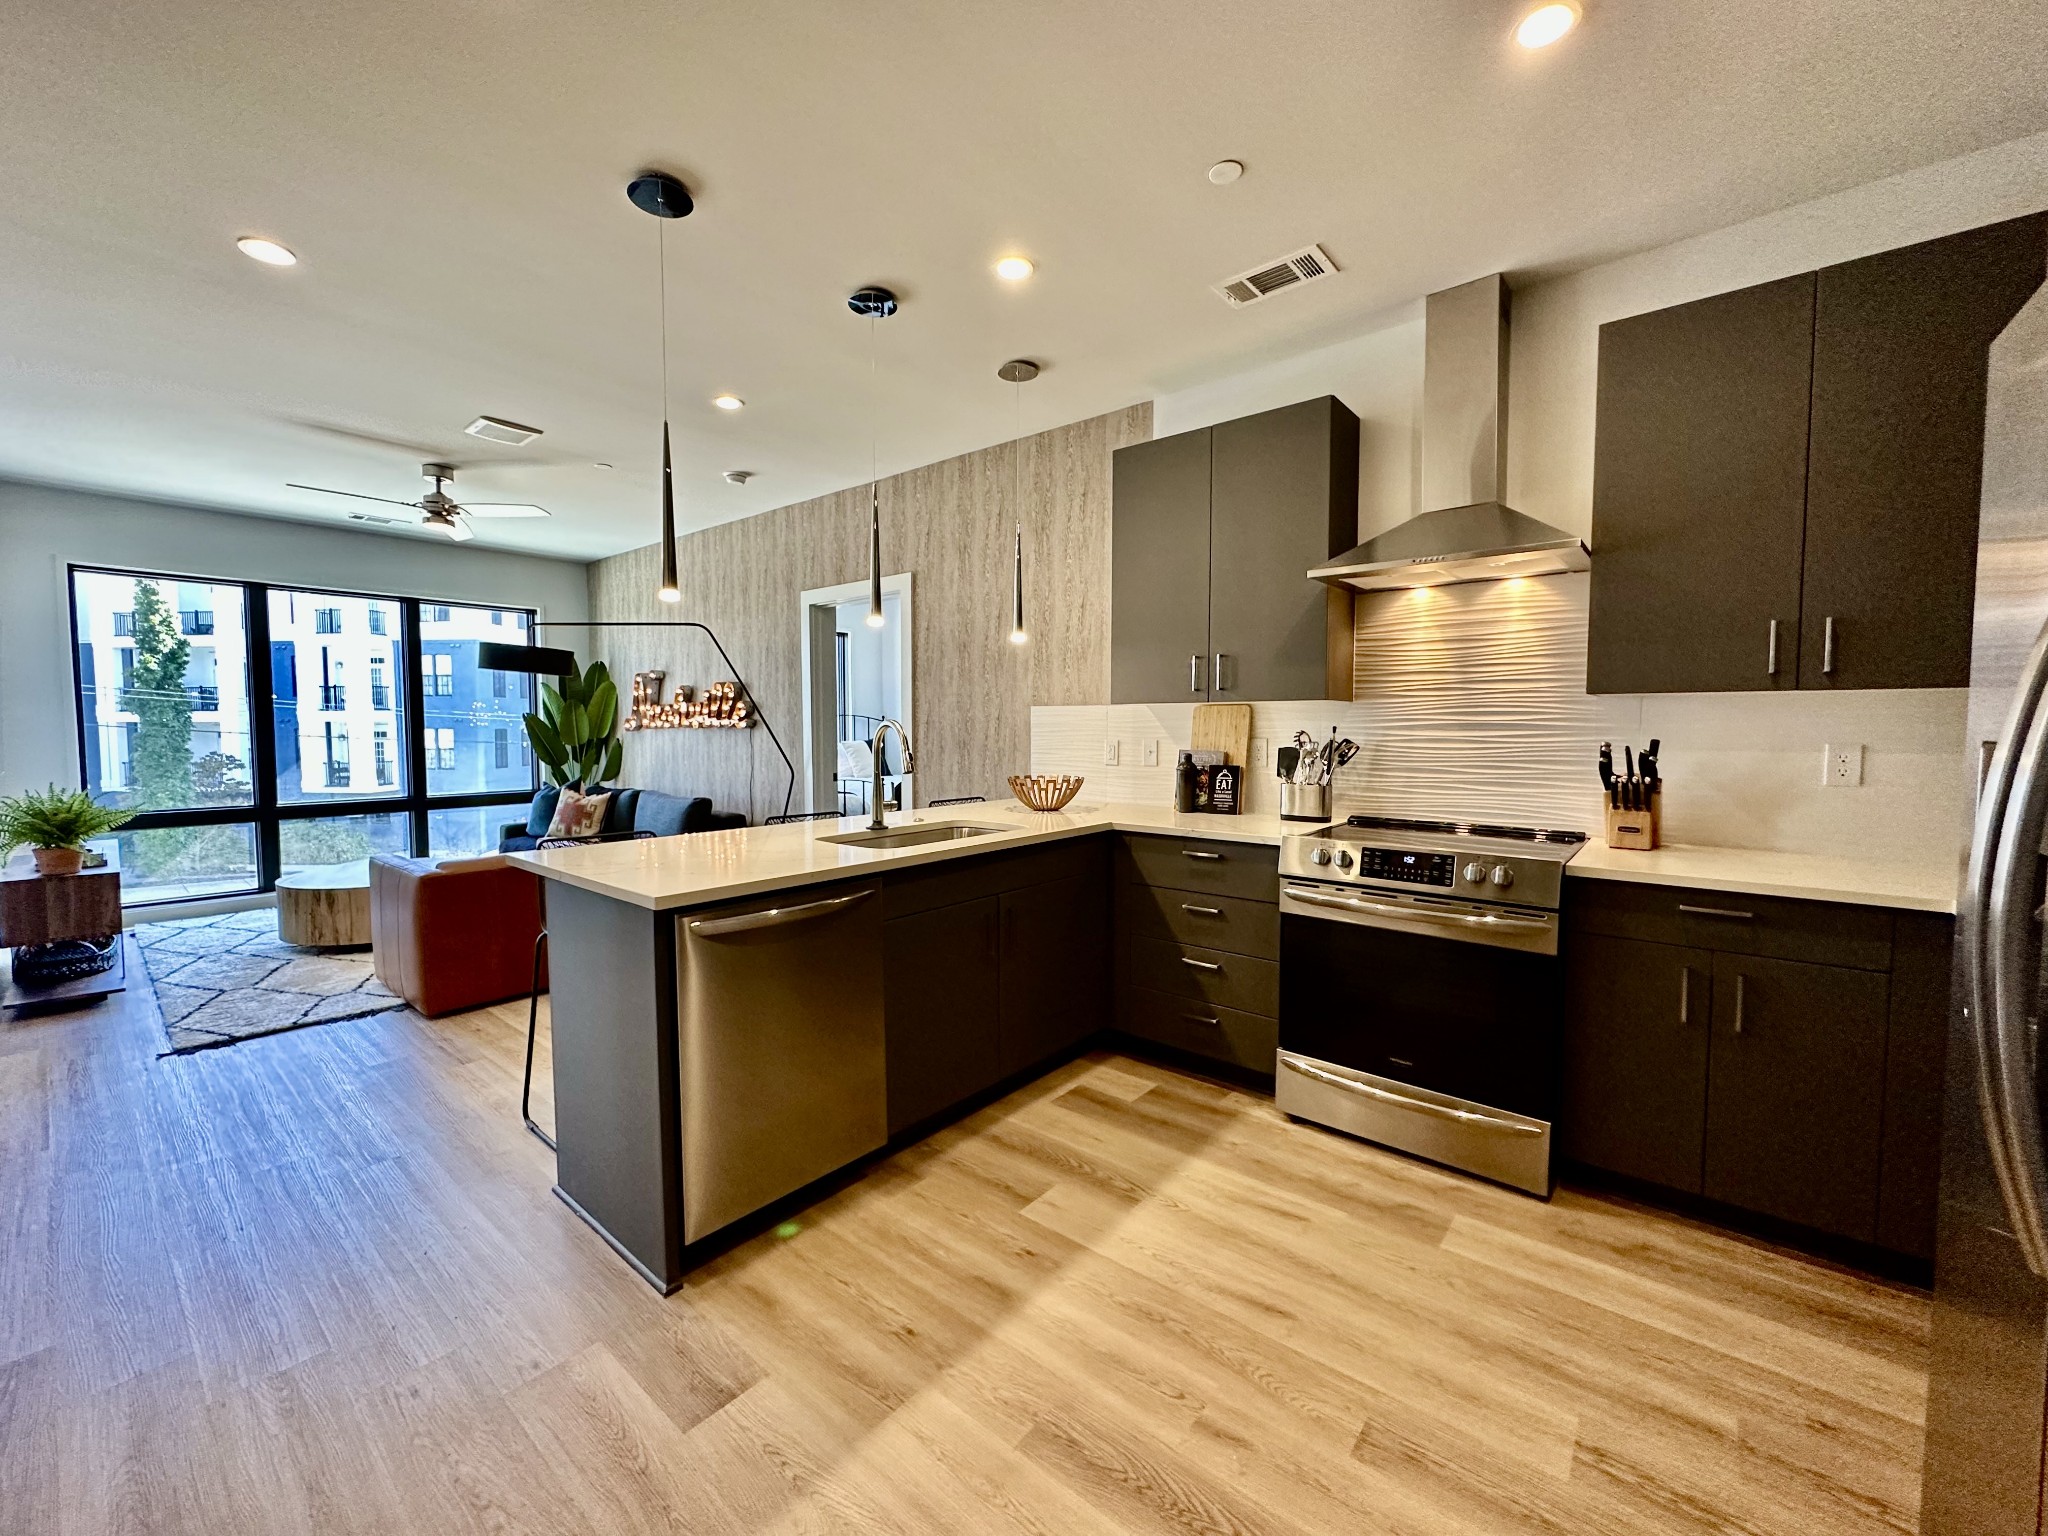 a kitchen with stainless steel appliances kitchen island granite countertop a stove a refrigerator a sink and a oven